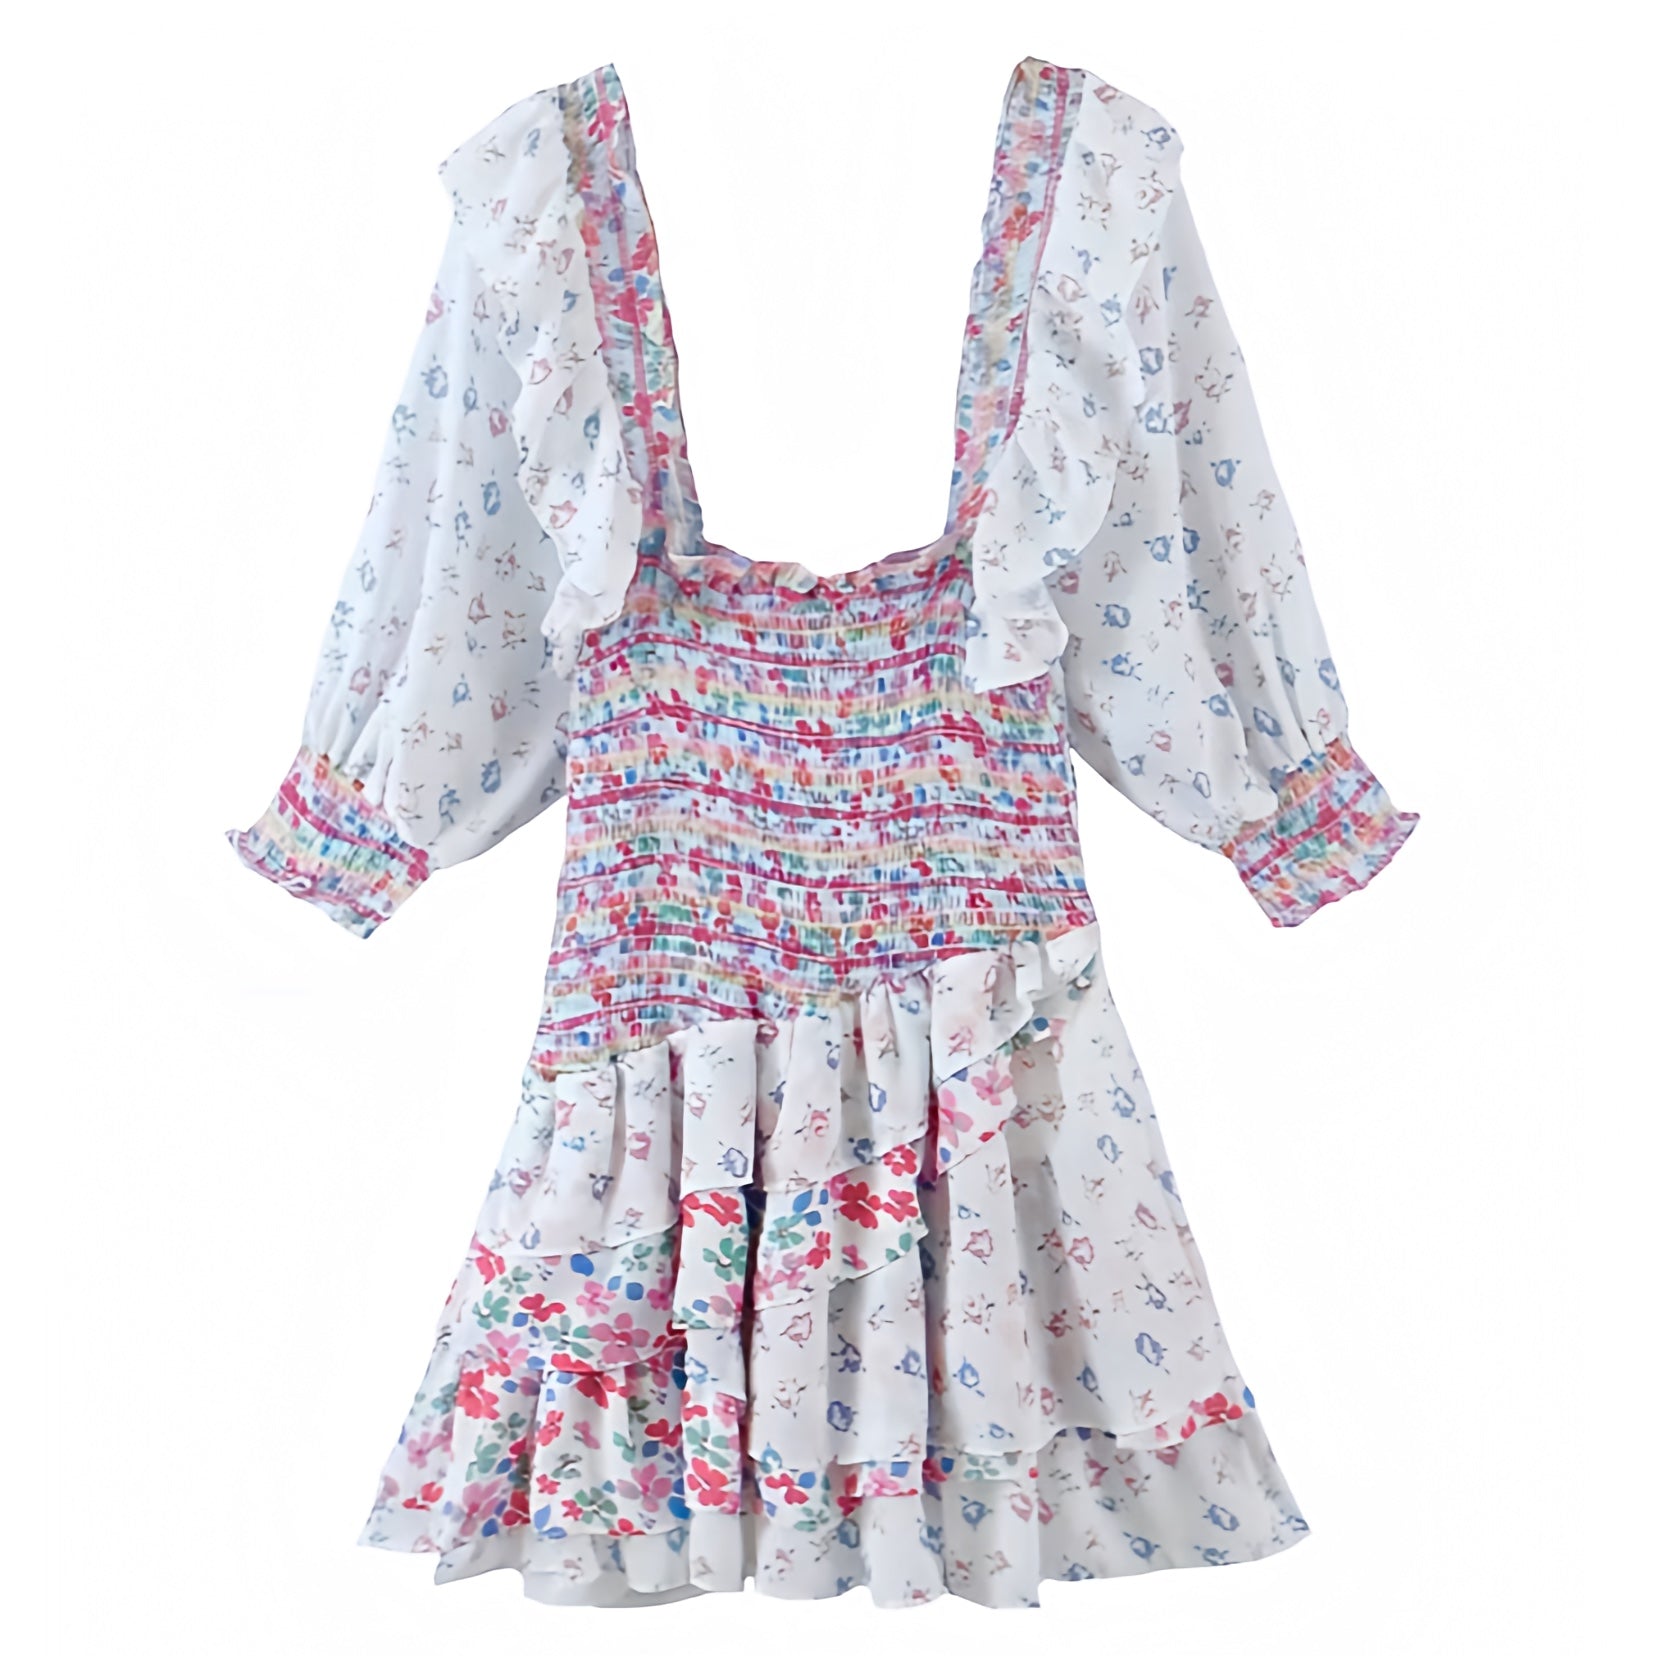 floral-print-multi-color-rainbow-flower-patterned-layered-ruffle-trim-smocked-bodycon-slim-fit-shirred-bodice-fitted-waist-flowy-boho-tullie-tiered-long-puff-sleeve-square-neckline-short-mini-dress-gown-women-ladies-trendy-chic-spring-2024-summer-elegant-casual-semi-formal-feminine-preppy-style-prom-party-beach-wear-vacation-sundress-loveshackfancy-zimmerman-altard-state